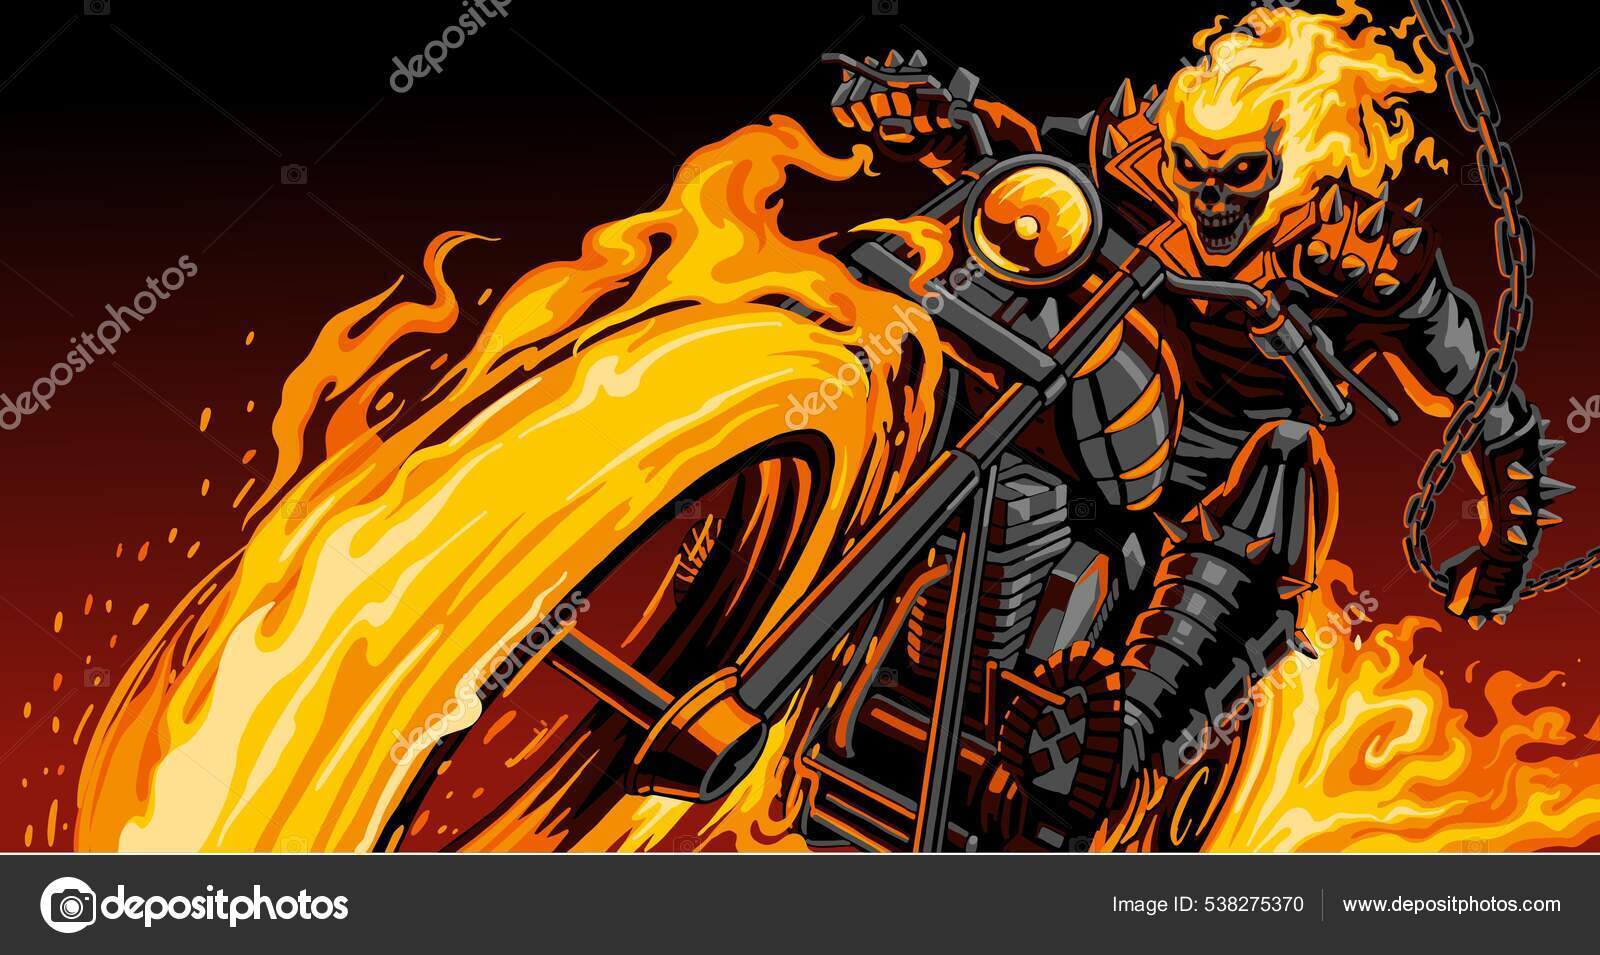 145 Ghost rider Vector Images | Depositphotos